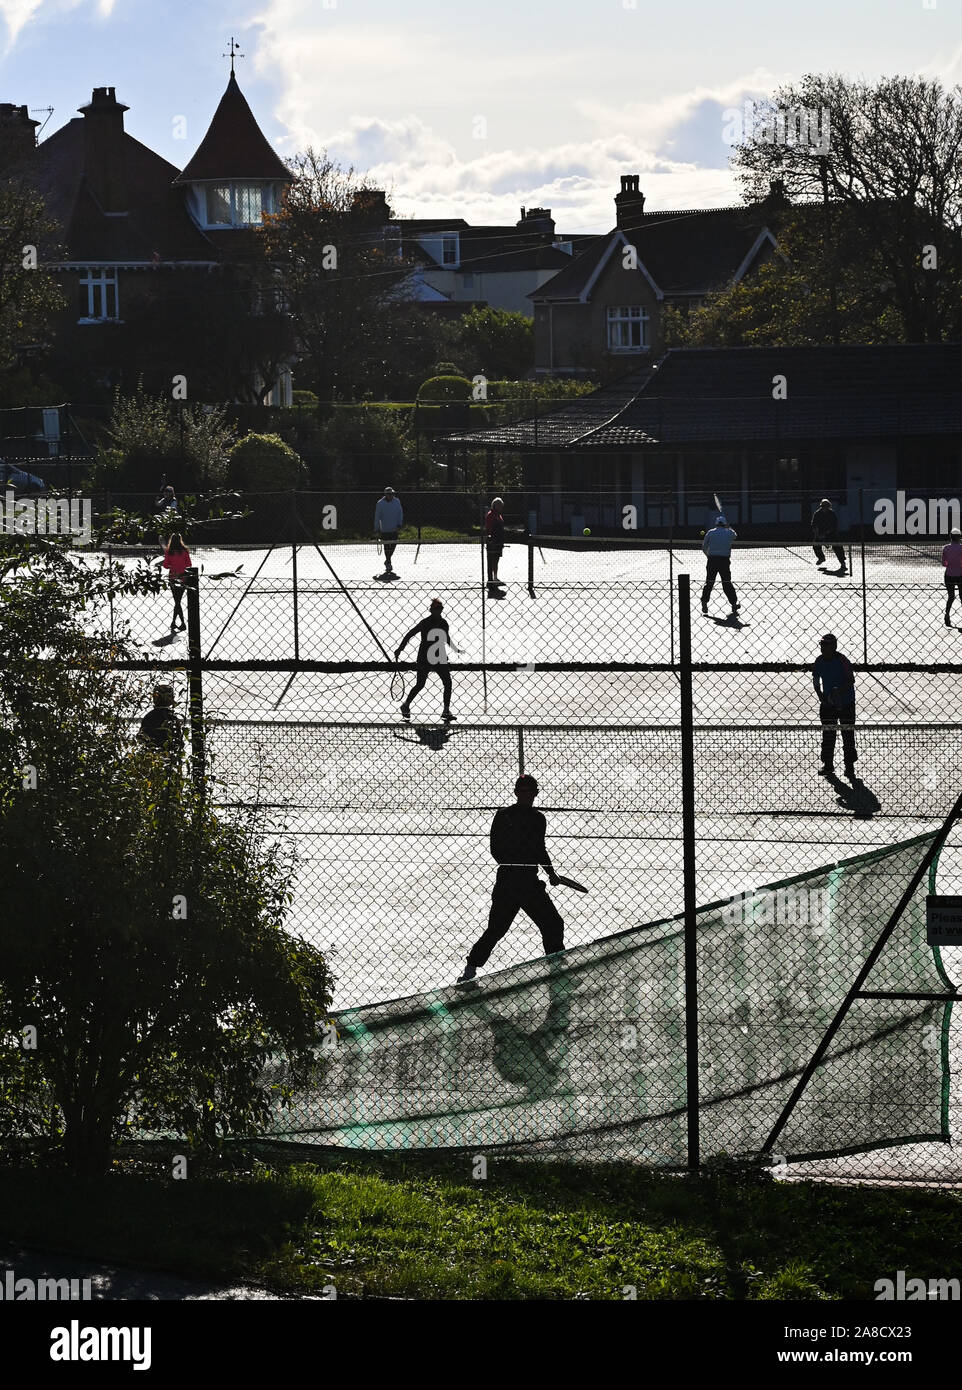 Brighton UK 8th November 2019 - Tennis players make the most of a beautiful sunny Autumn morning in Queens Park Brighton as other parts of Britain experience heavy rain and floods particularly in the north. Credit: Simon Dack / Alamy Live News Stock Photo